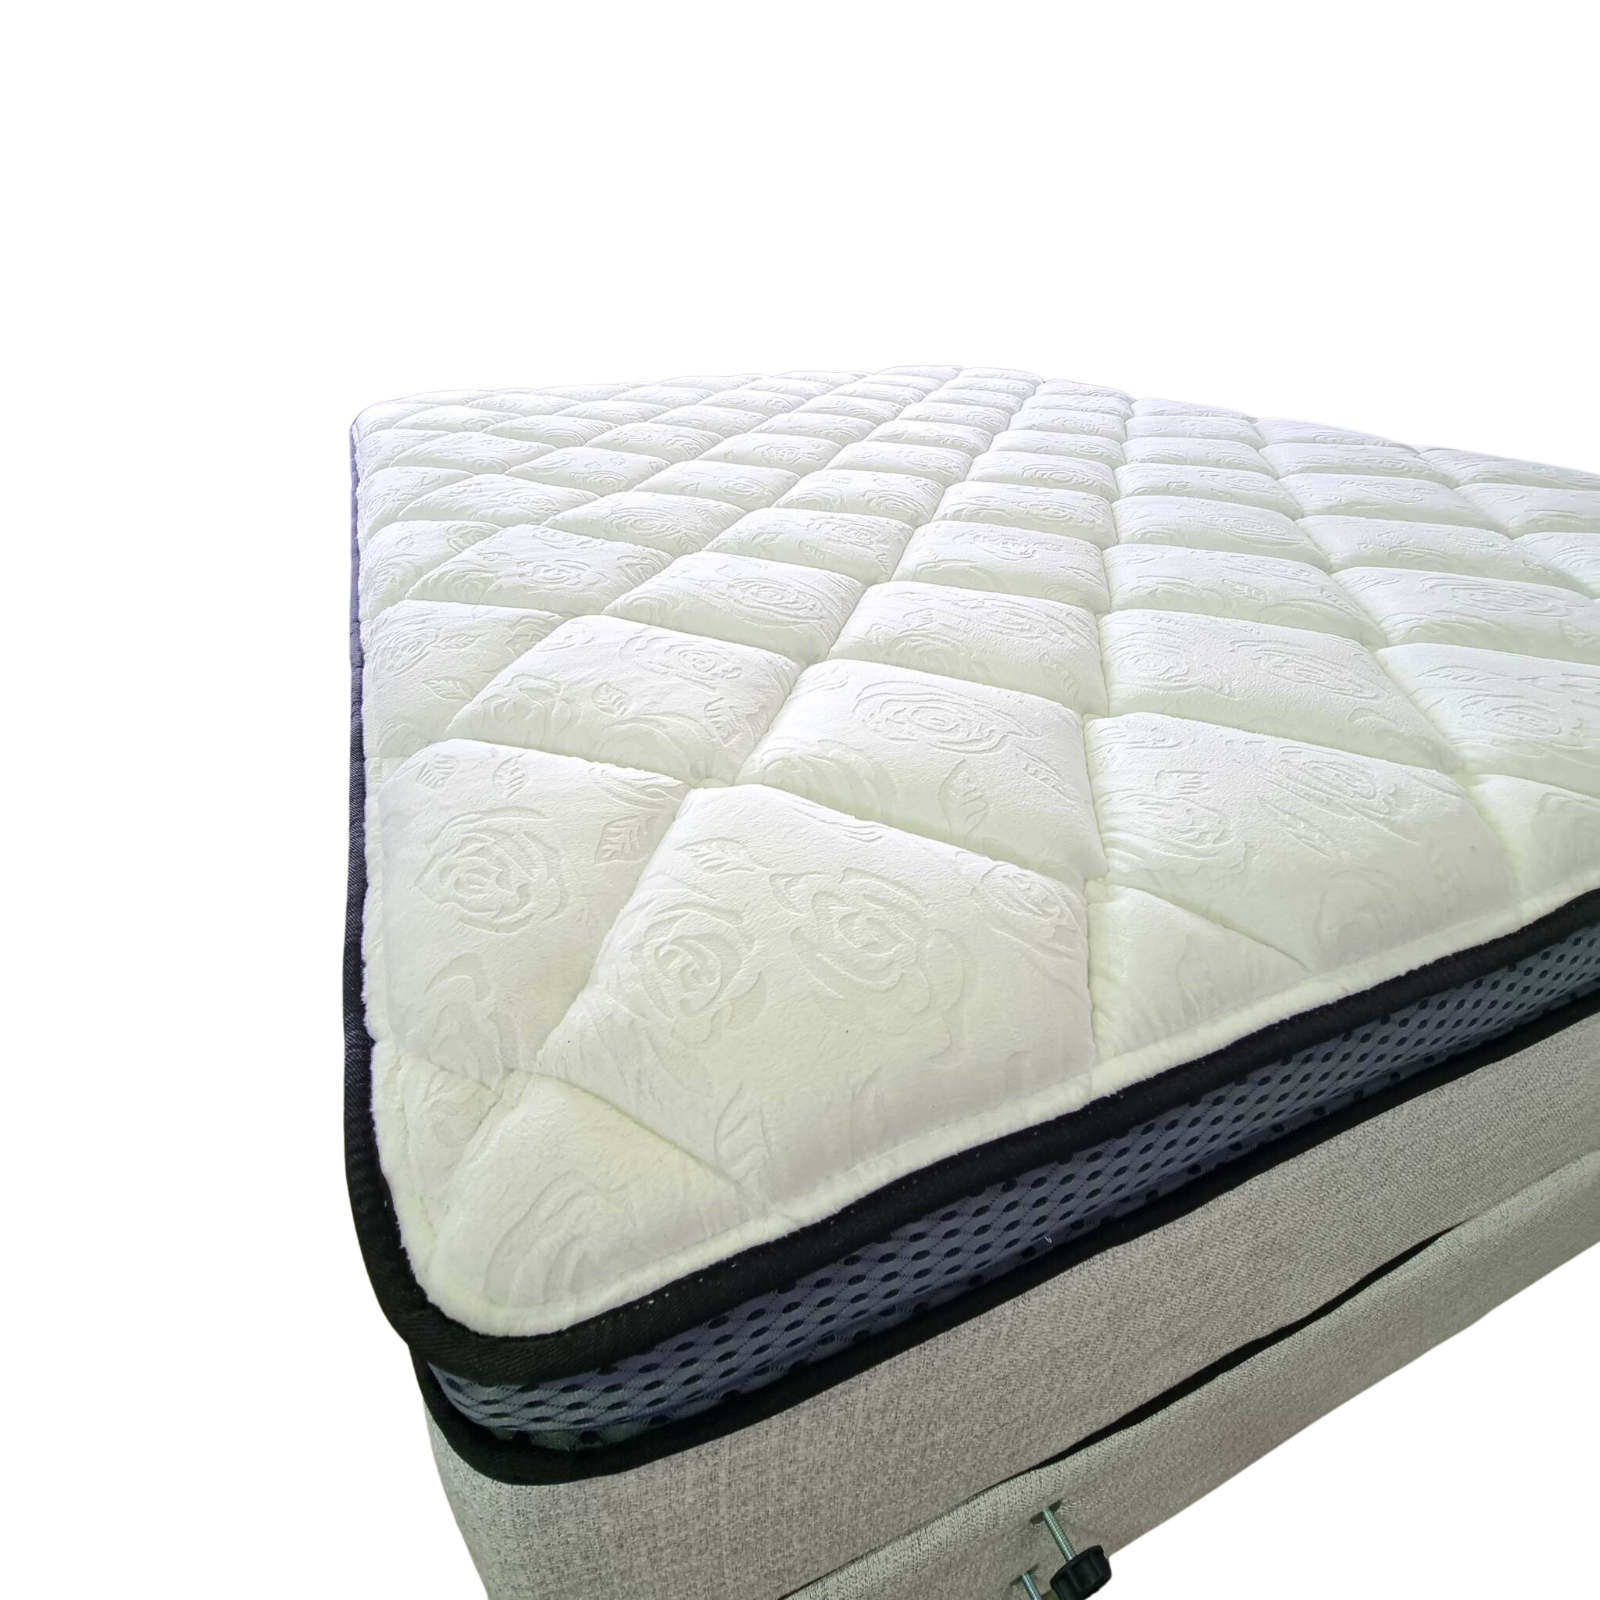 Pure Bliss Deluxe - King Single Mattress